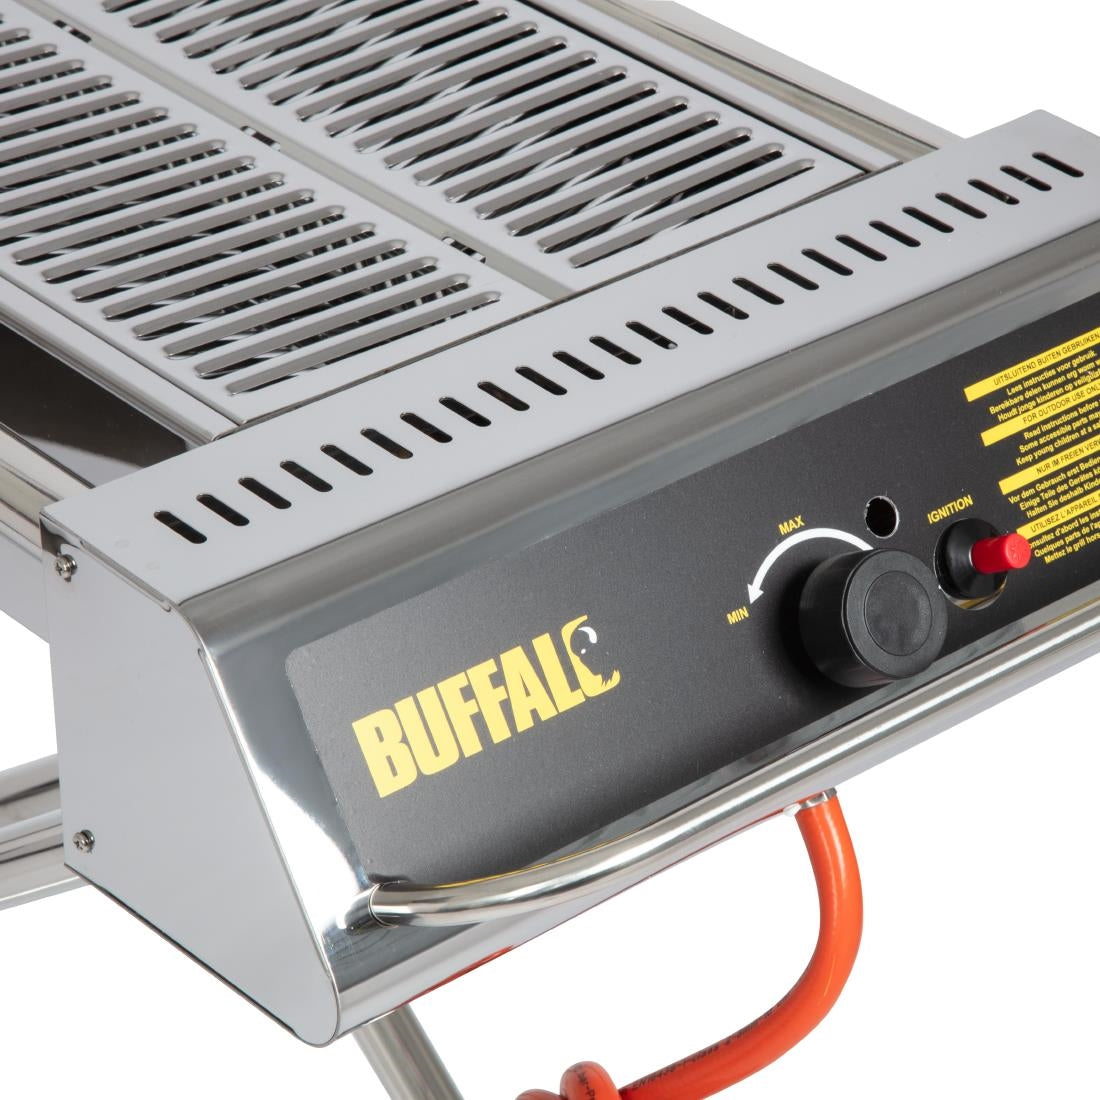 Buffalo Folding Propane Gas Barbecue P111 JD Catering Equipment Solutions Ltd